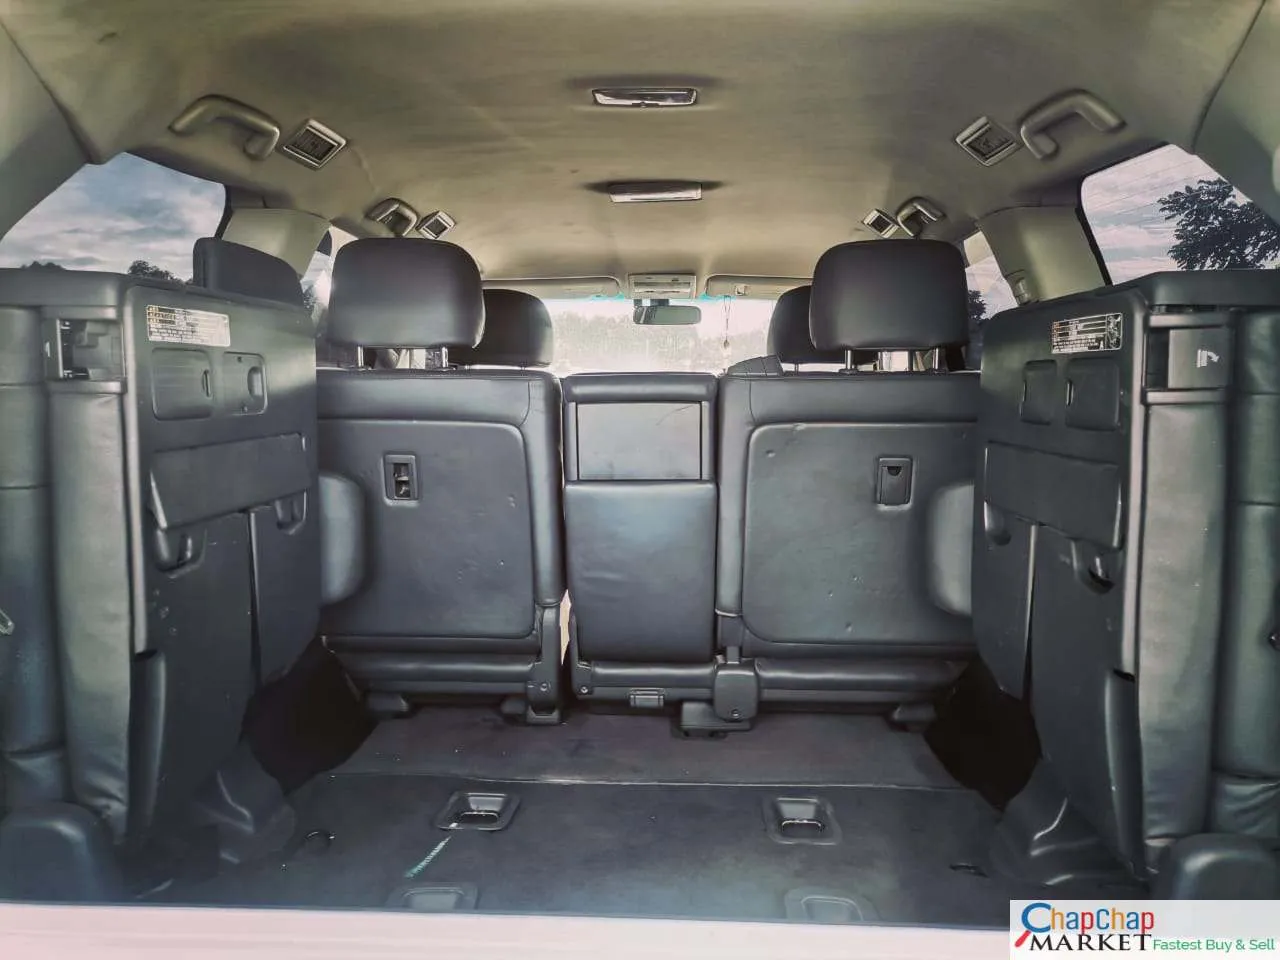 Toyota Land cruiser V8 For Sale in Kenya 202 3.3M Only SUNROOF LEATHER TRADE IN OK EXCLUSIVE